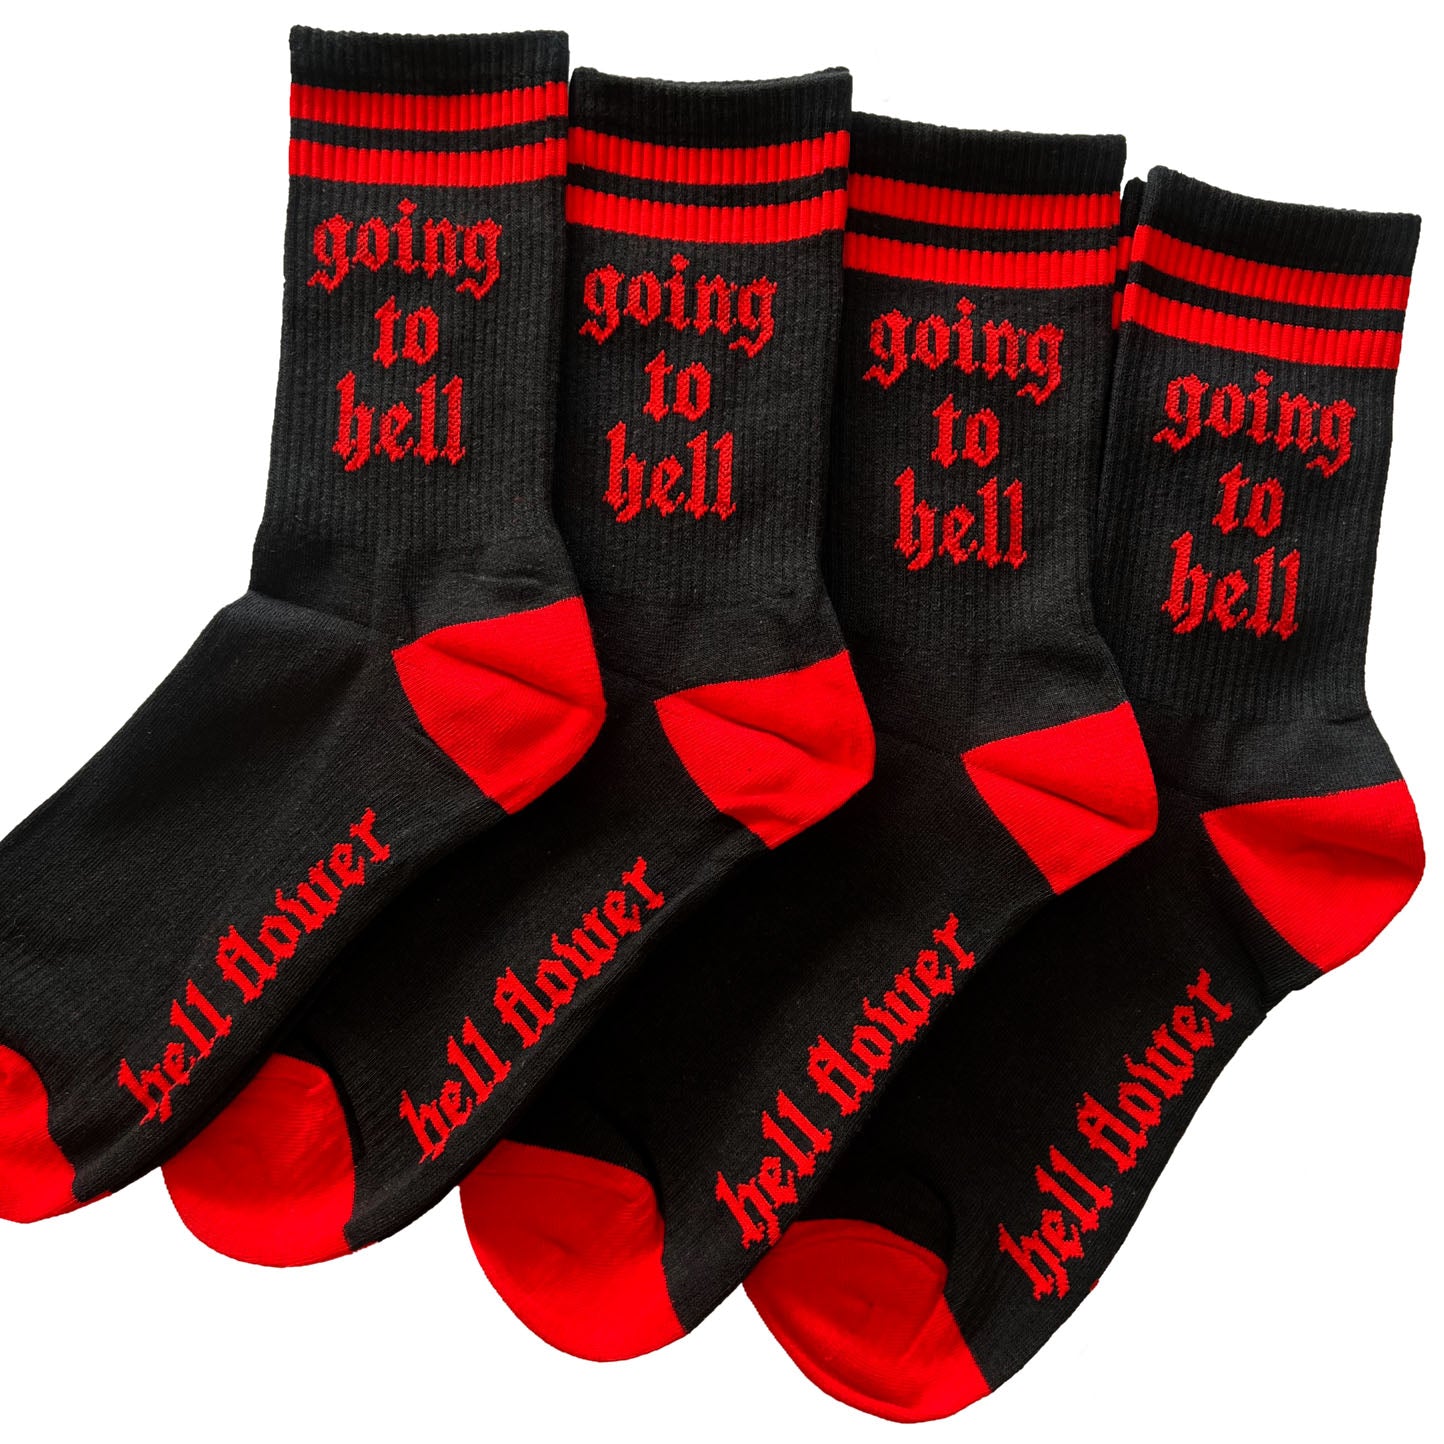 Going To Hell socks black/red